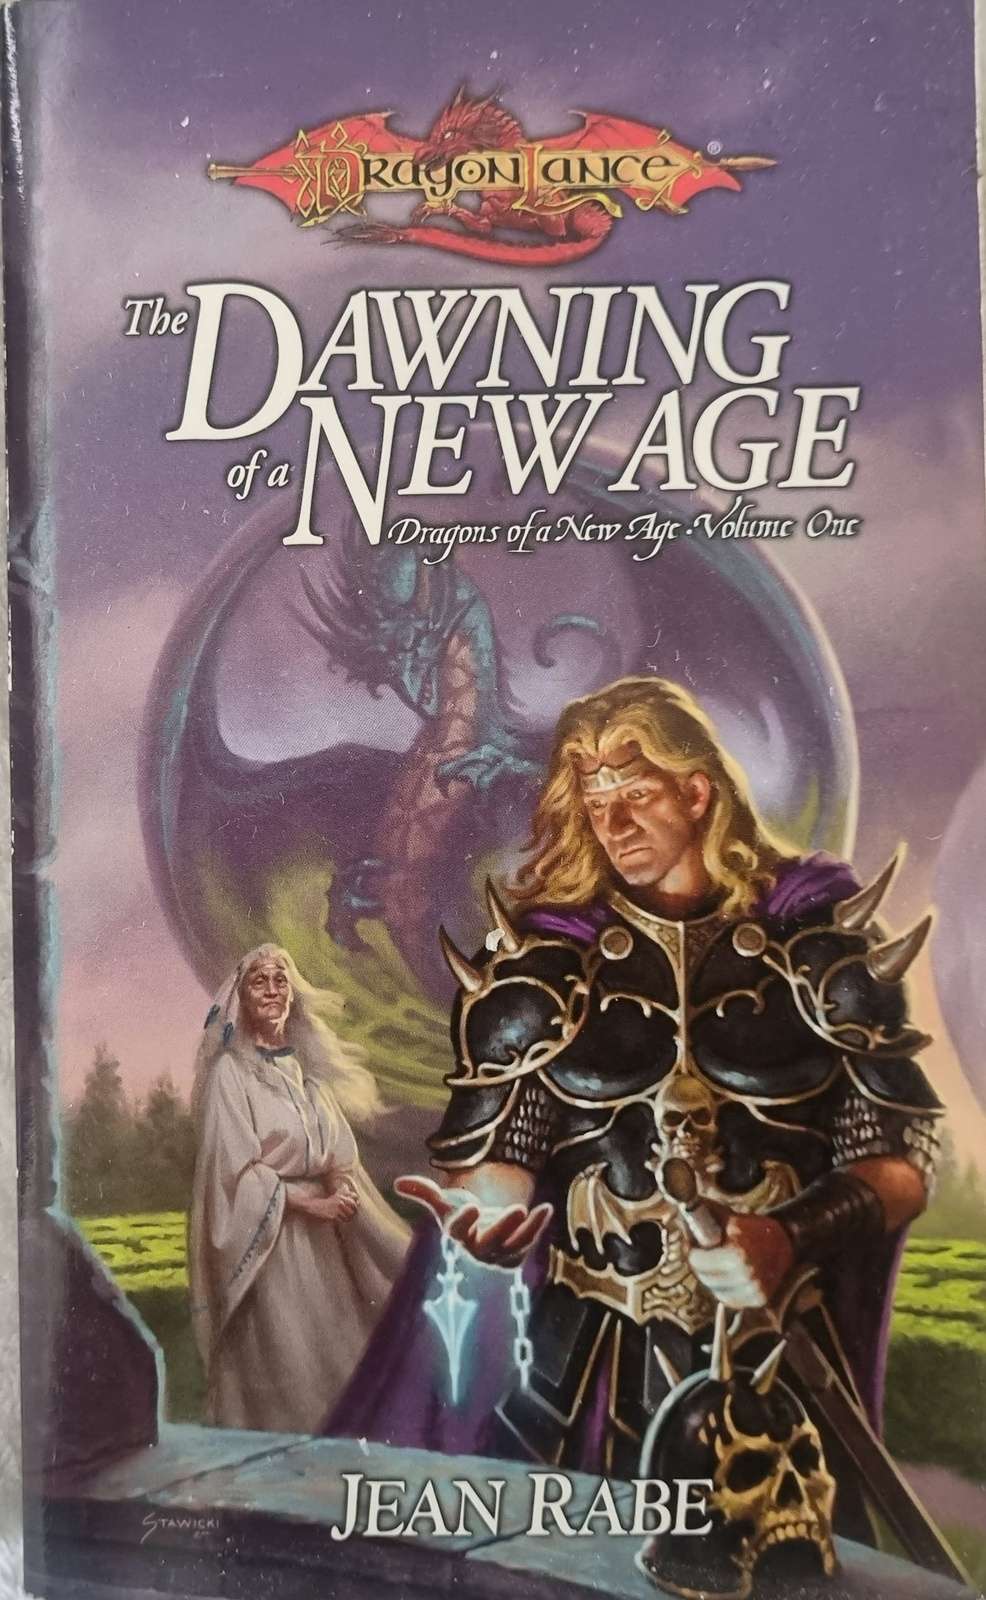 Dragonlance: The Dawning of a New Age - Jean Rabe